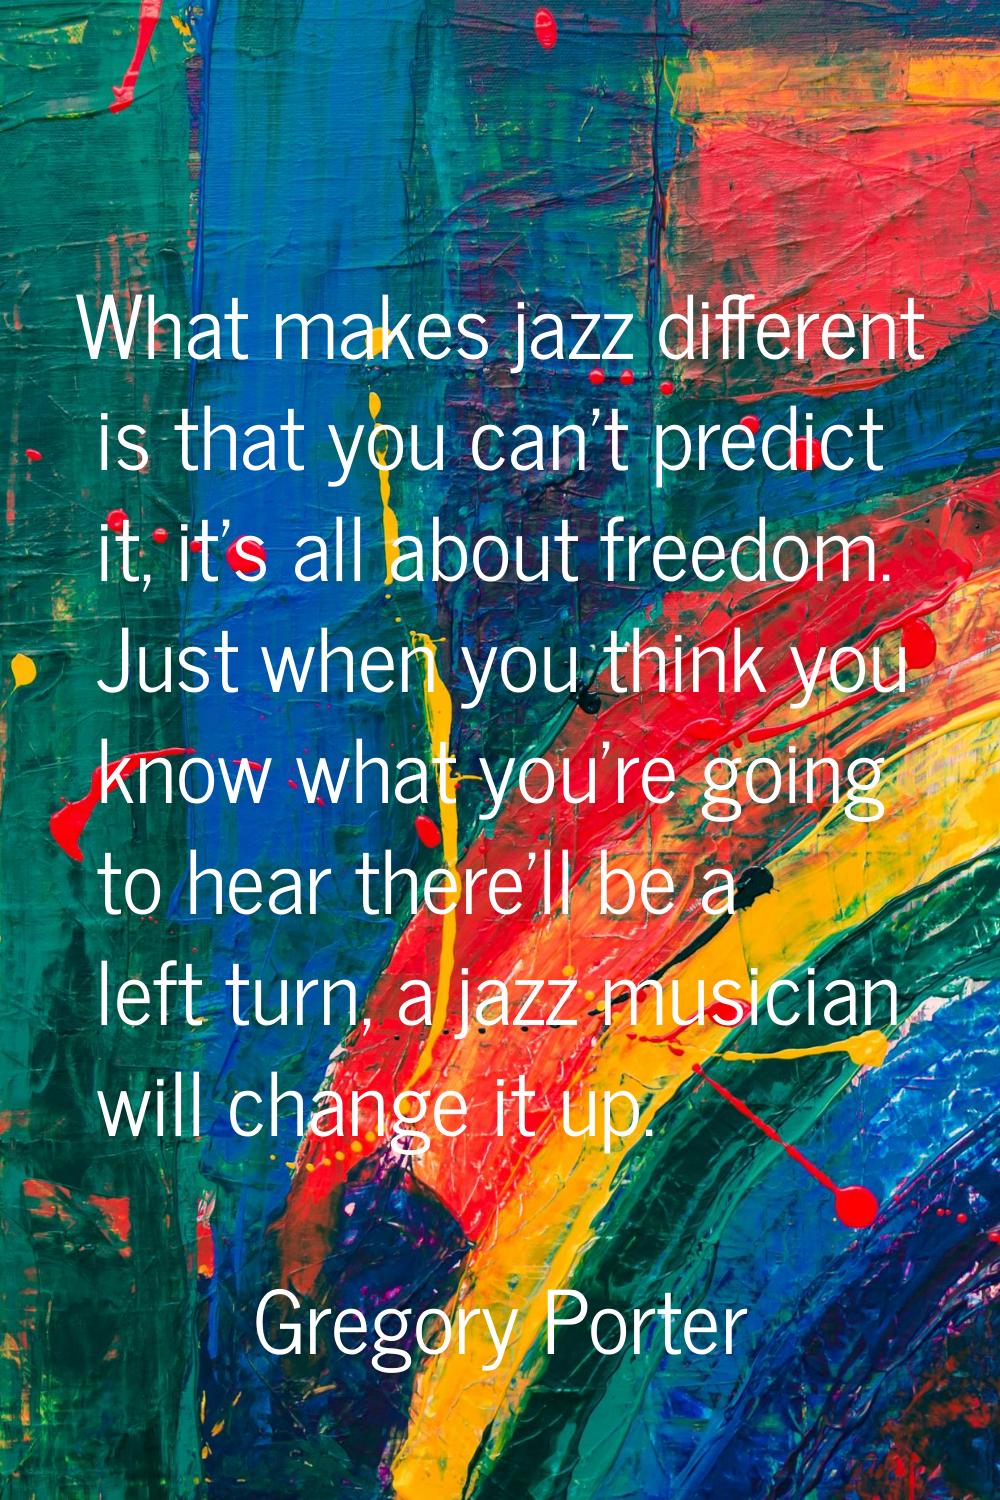 What makes jazz different is that you can't predict it, it's all about freedom. Just when you think